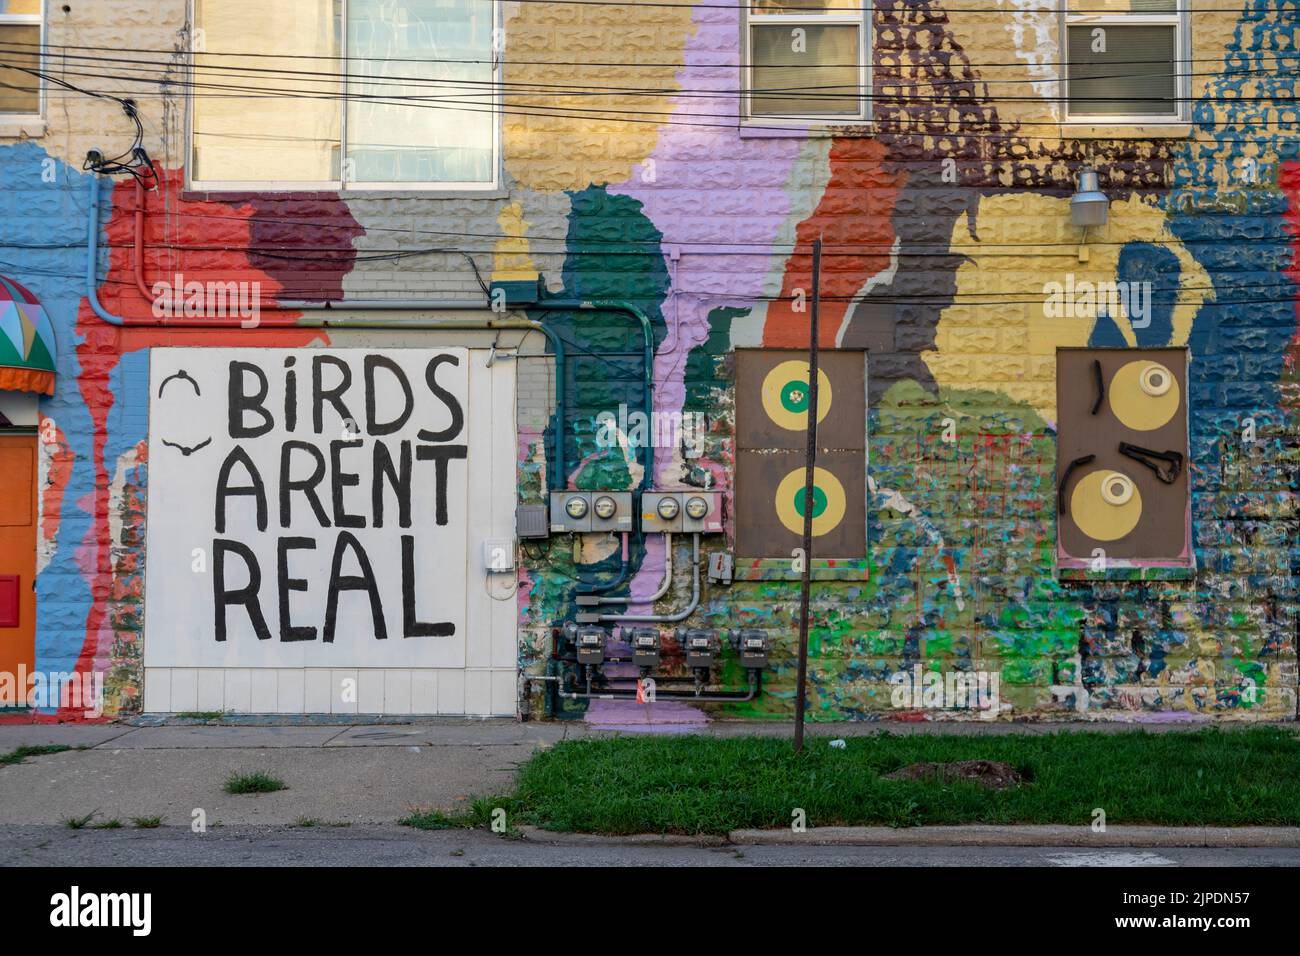 Kalamazoo, Michigan - A wall painted with the 'Birds Aren't Real' slogan. The slogan is a popular satire of Donald Trump-inspired conspiracy theories. Stock Photo